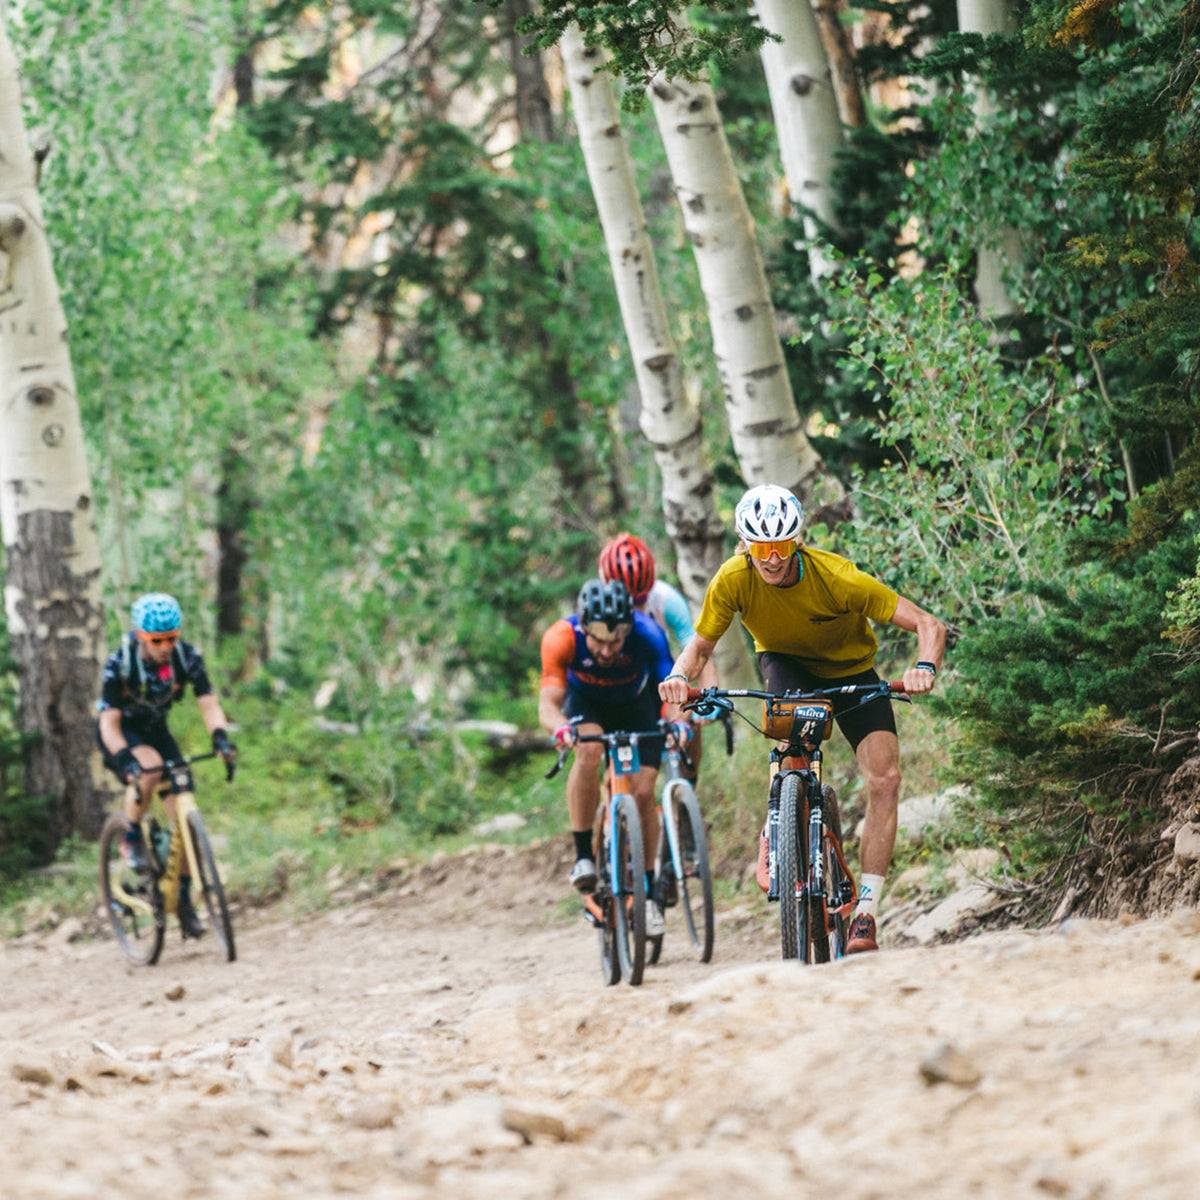 tj eisenhart climbing in the dry creek flyweight pocket tee at the Wasatch all-road race in utah